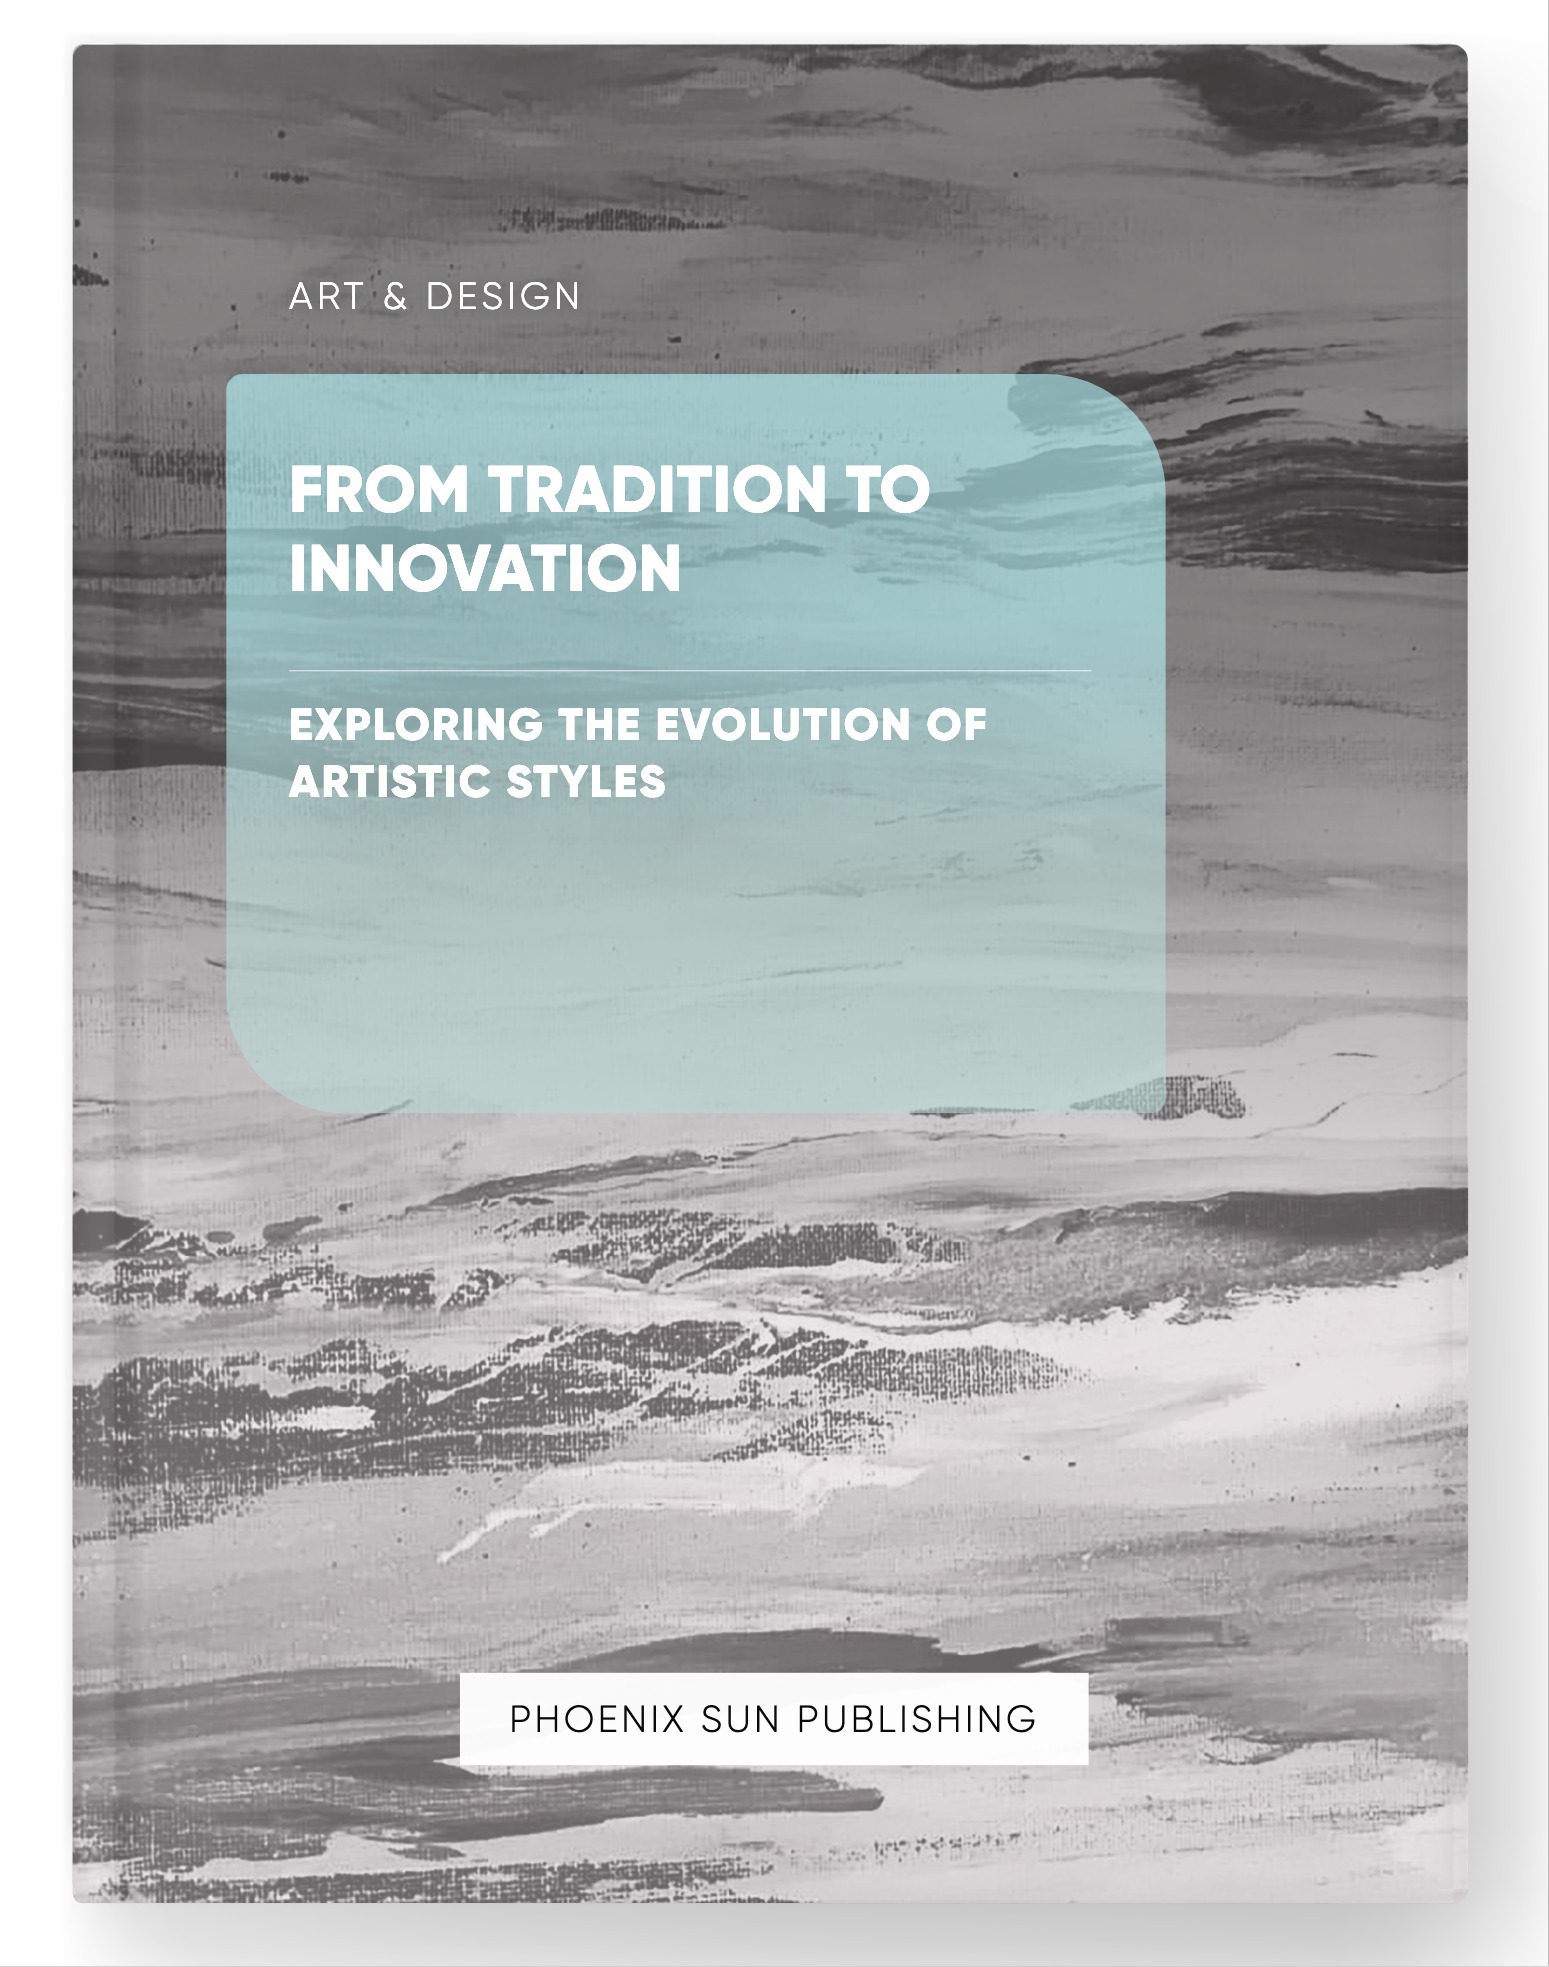 From Tradition to Innovation – Exploring the Evolution of Artistic Styles